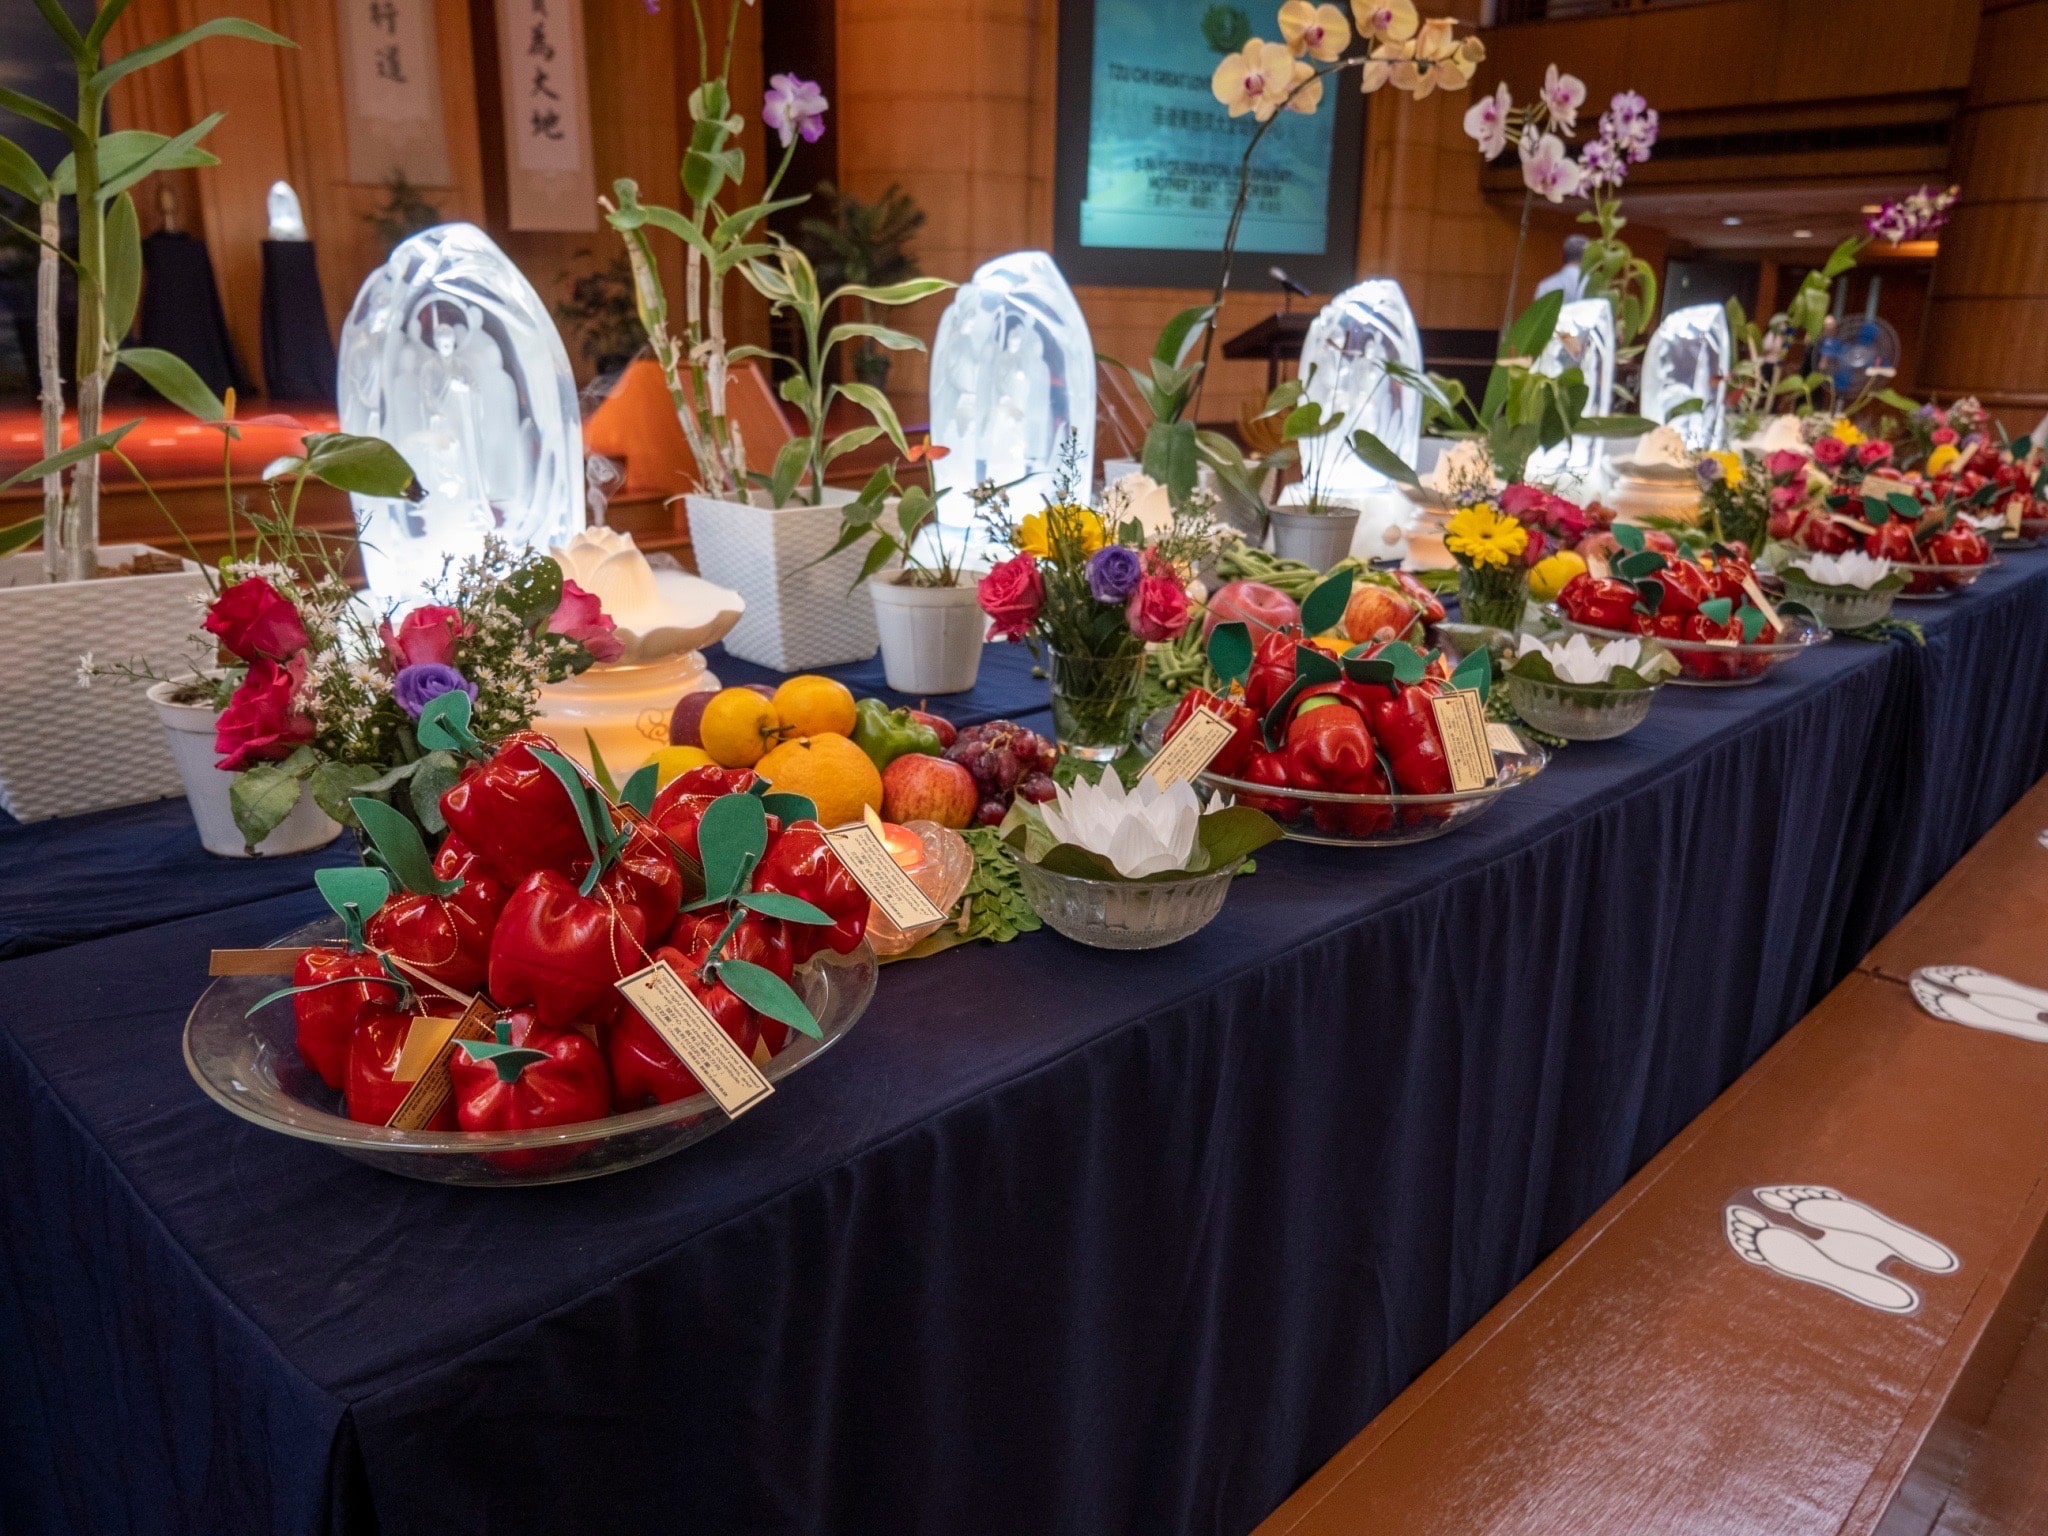 Crystal Buddhas on the table are adorned with fruits, vegetables, and fresh flowers, while recycled plastic fruits designed and painted by the students serve as souvenir for participants. 【Photo by Matt Serrano】